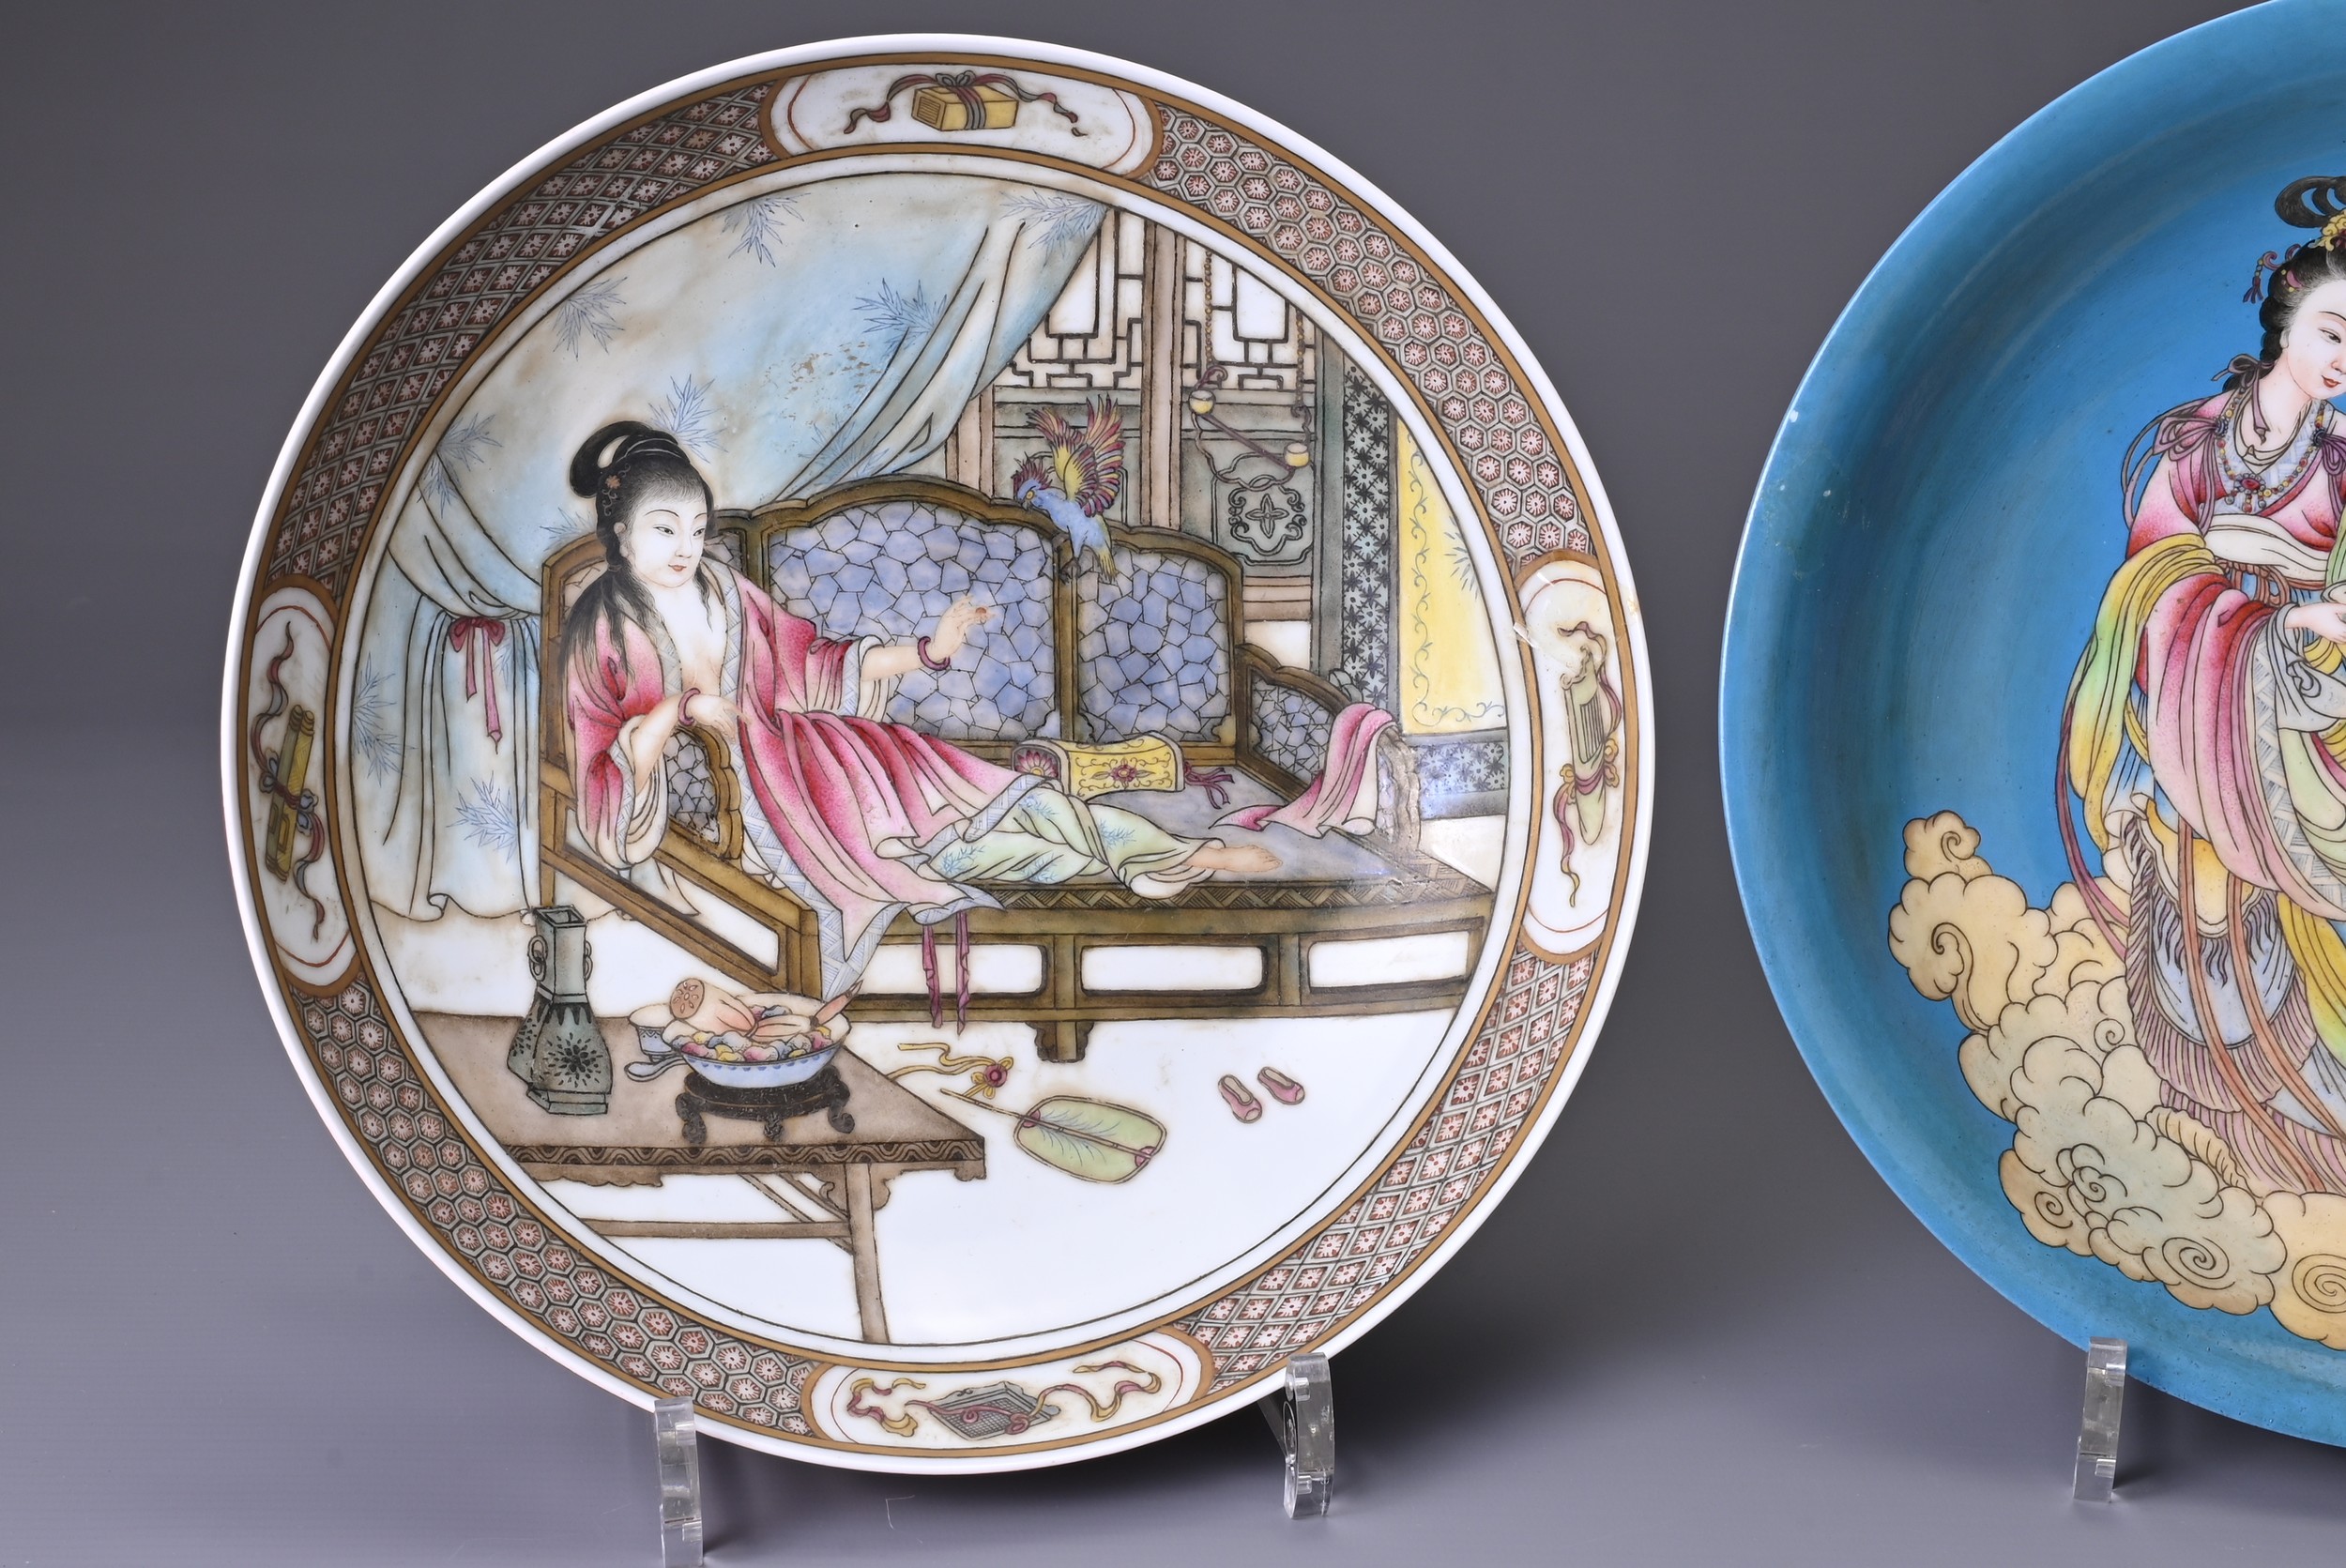 TWO CHINESE PORCELAIN FAMILLE ROSE CIRCULAR DISHES, 20TH CENTURY. Each with iron-red enamel and gilt - Image 2 of 7